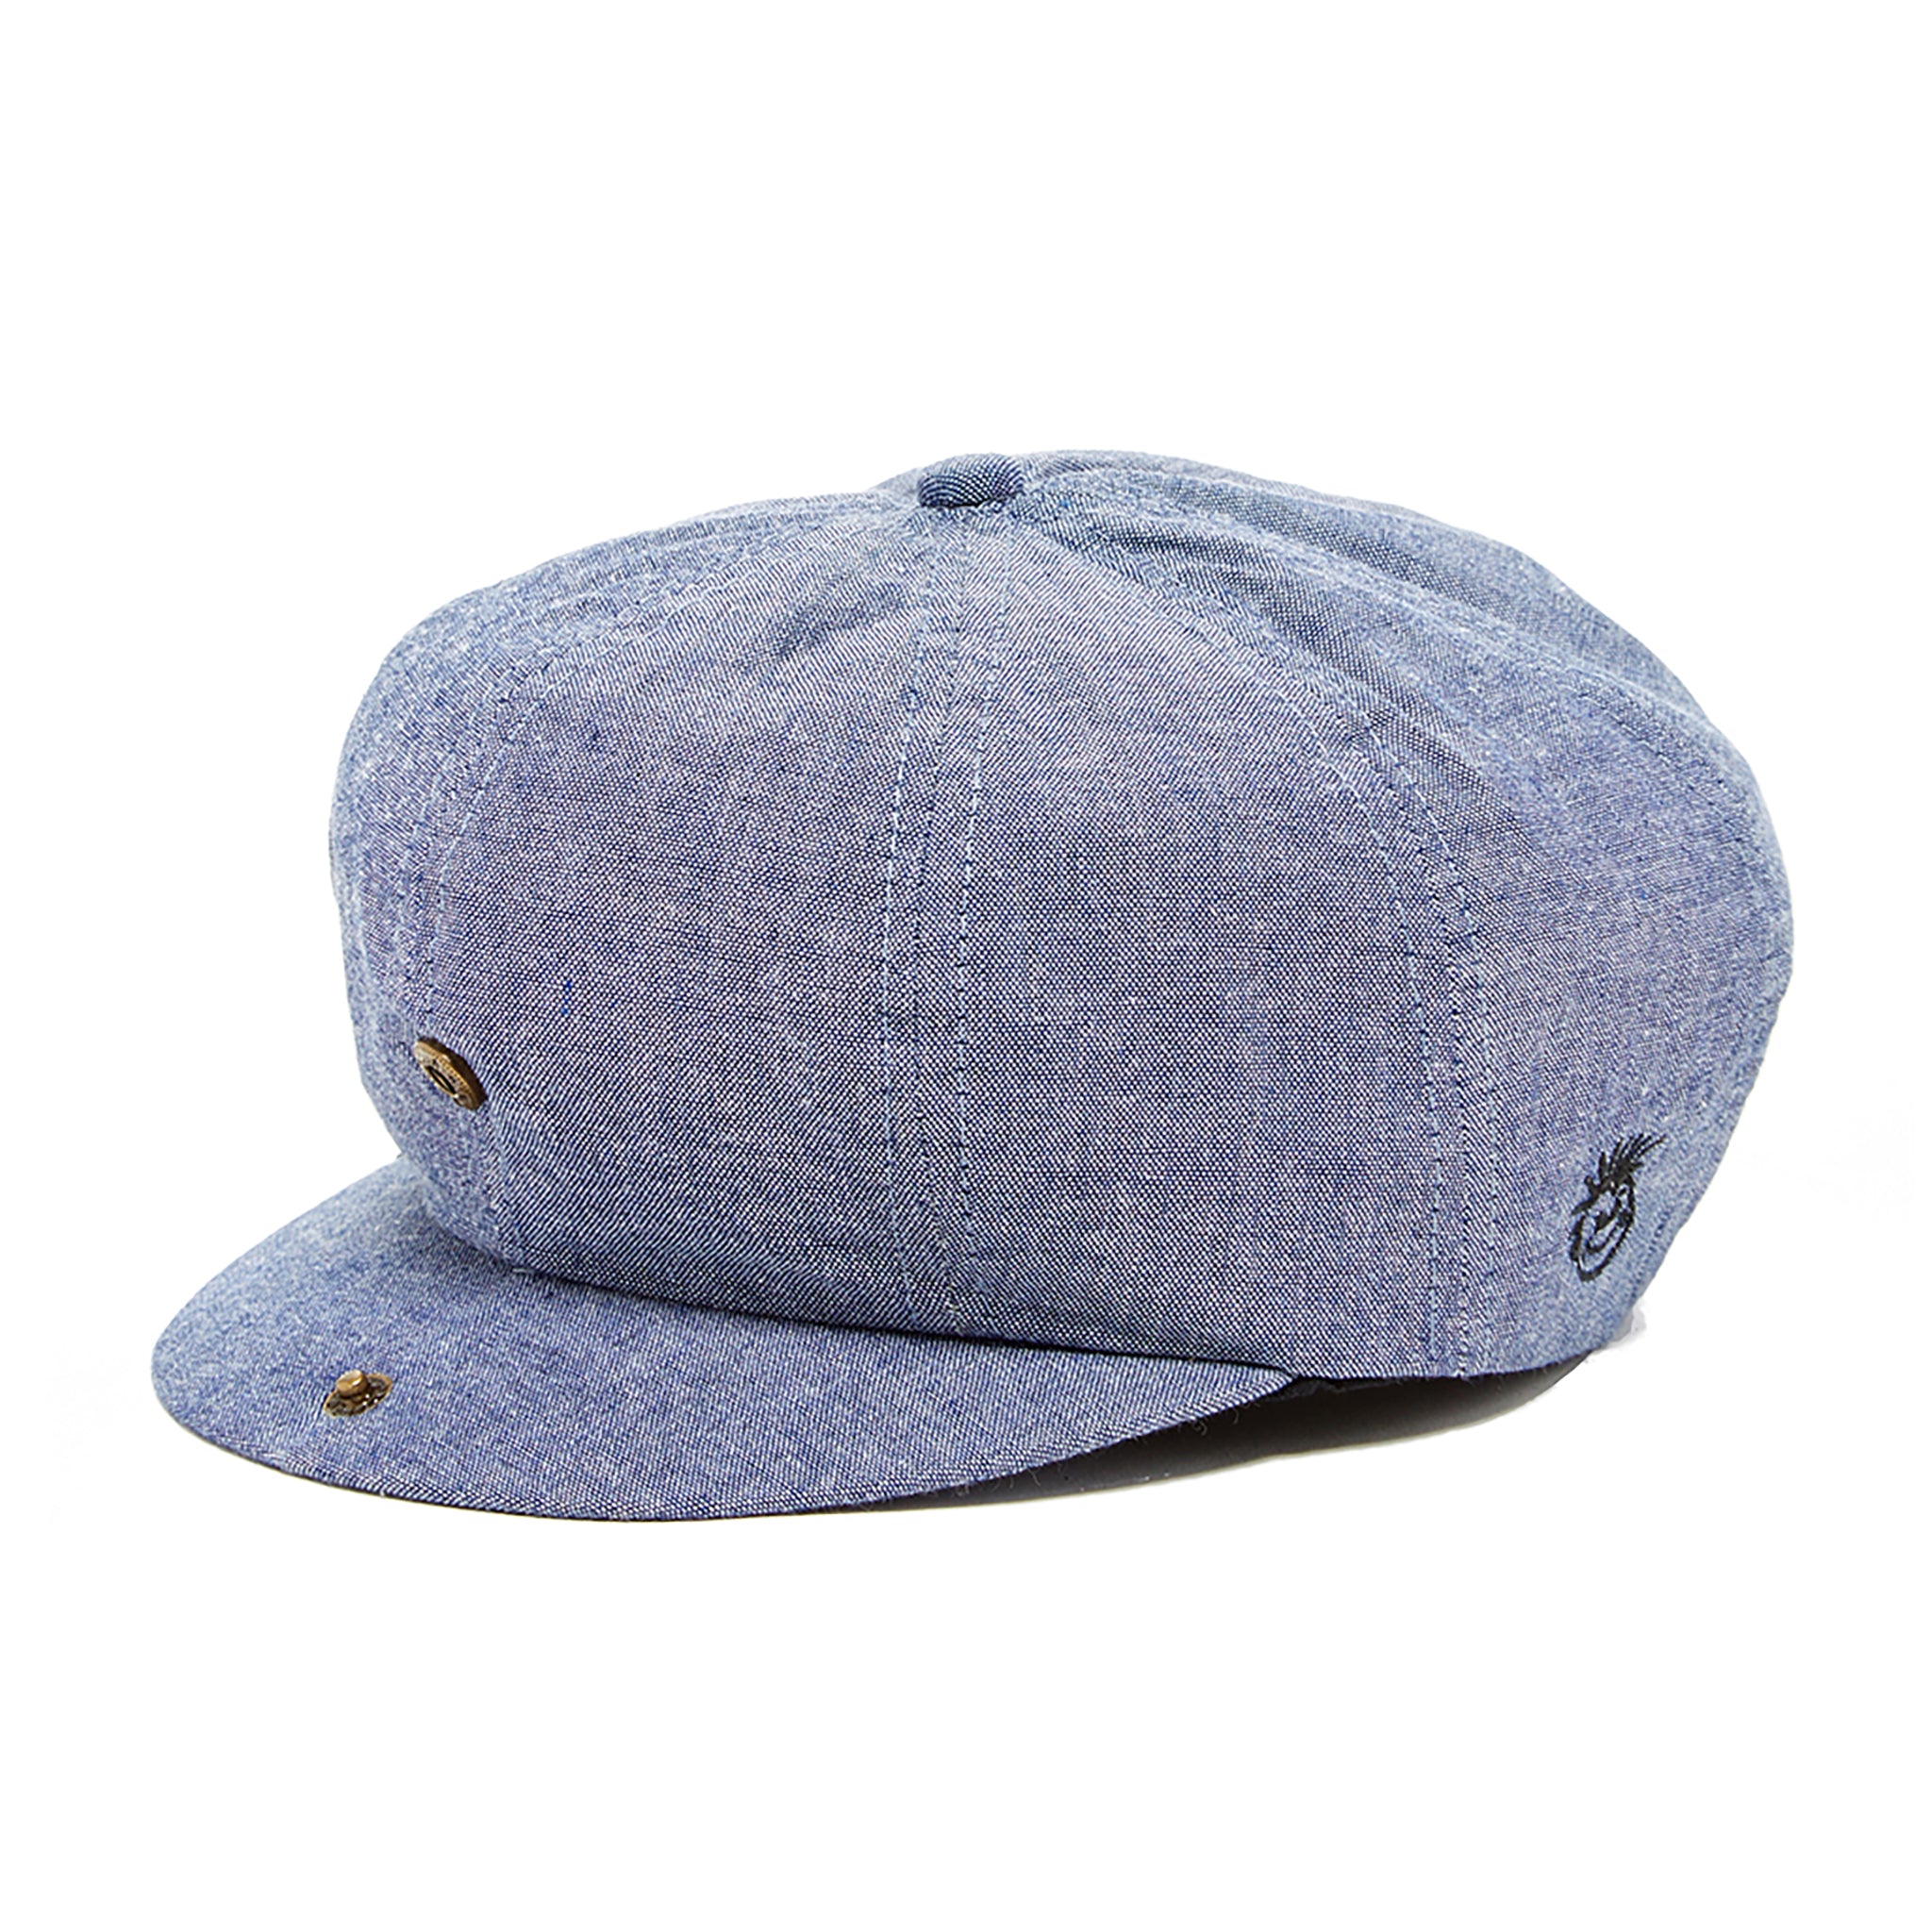 Knuckleheads Groovy Newsboy Denim Cap for Boys 0 Month to 8 Years ...